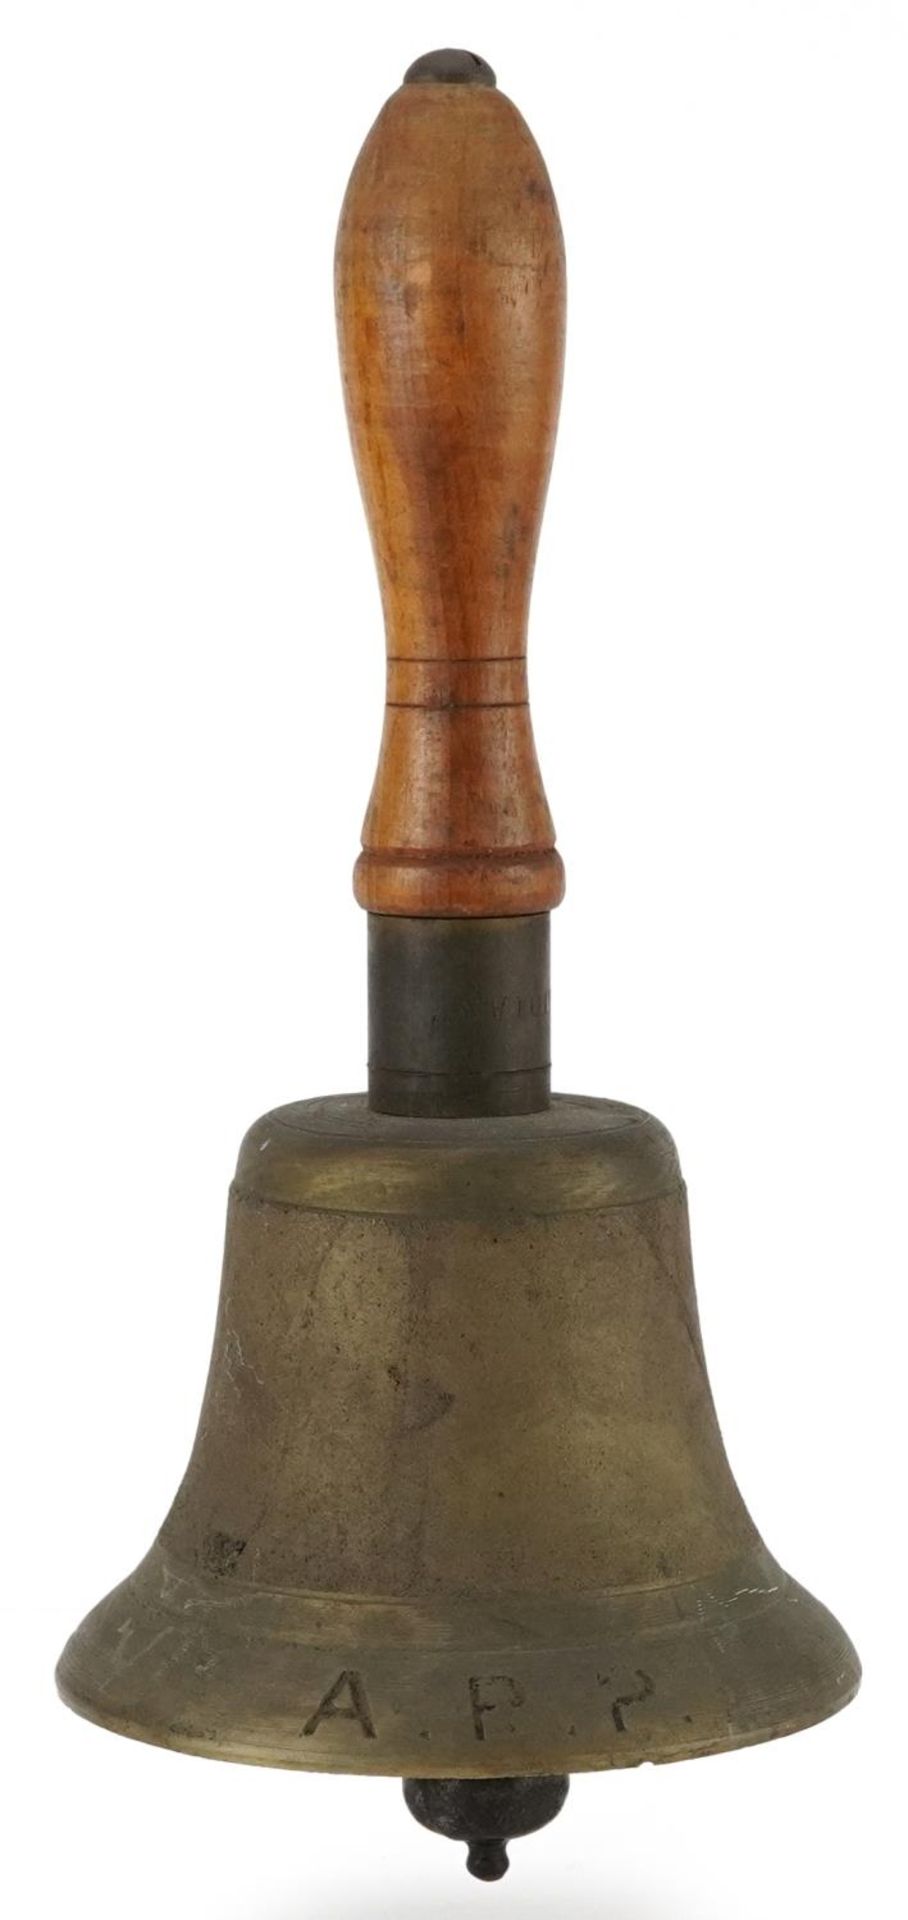 British military ARP Civil Defence bell with turned wooden handle, 26.5cm high